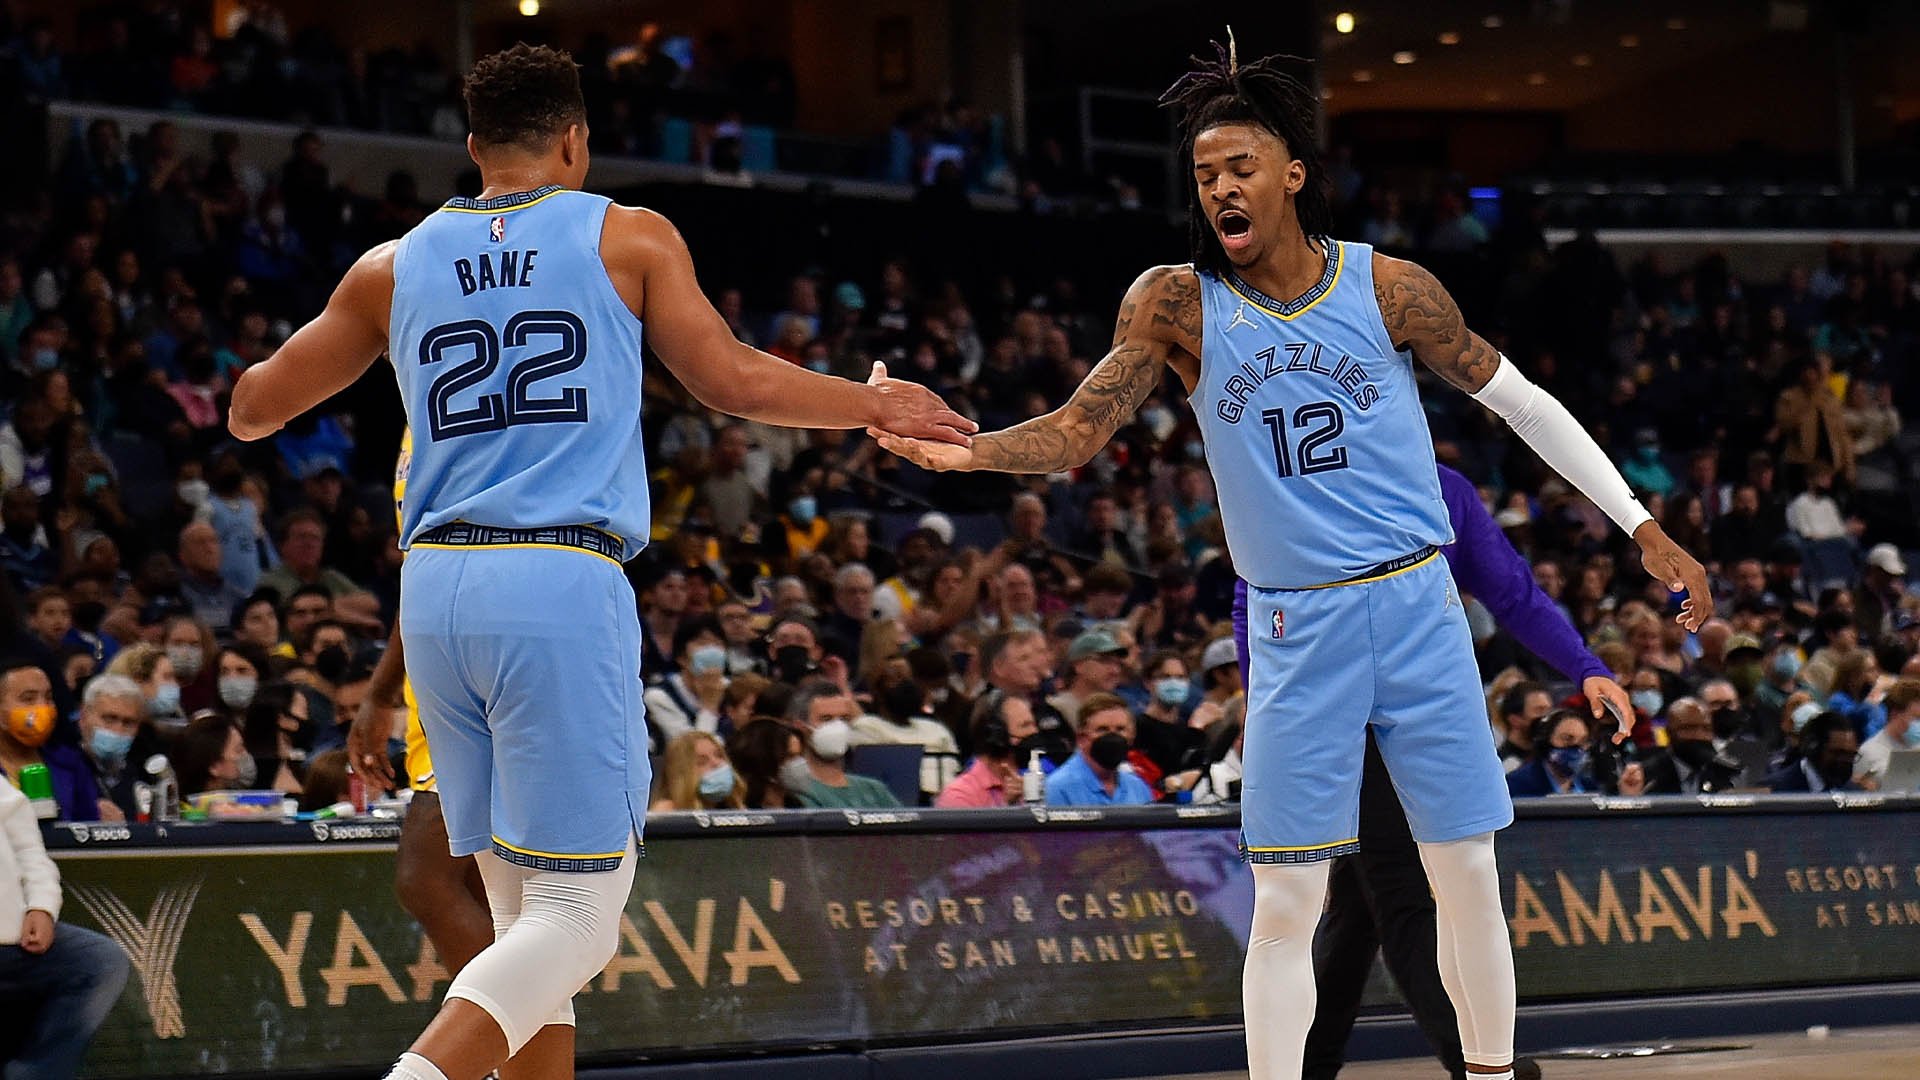 Ja Morant and Desmond Bane outdueled Kevin Durant and Kyrie Irving in a glorious display of offense